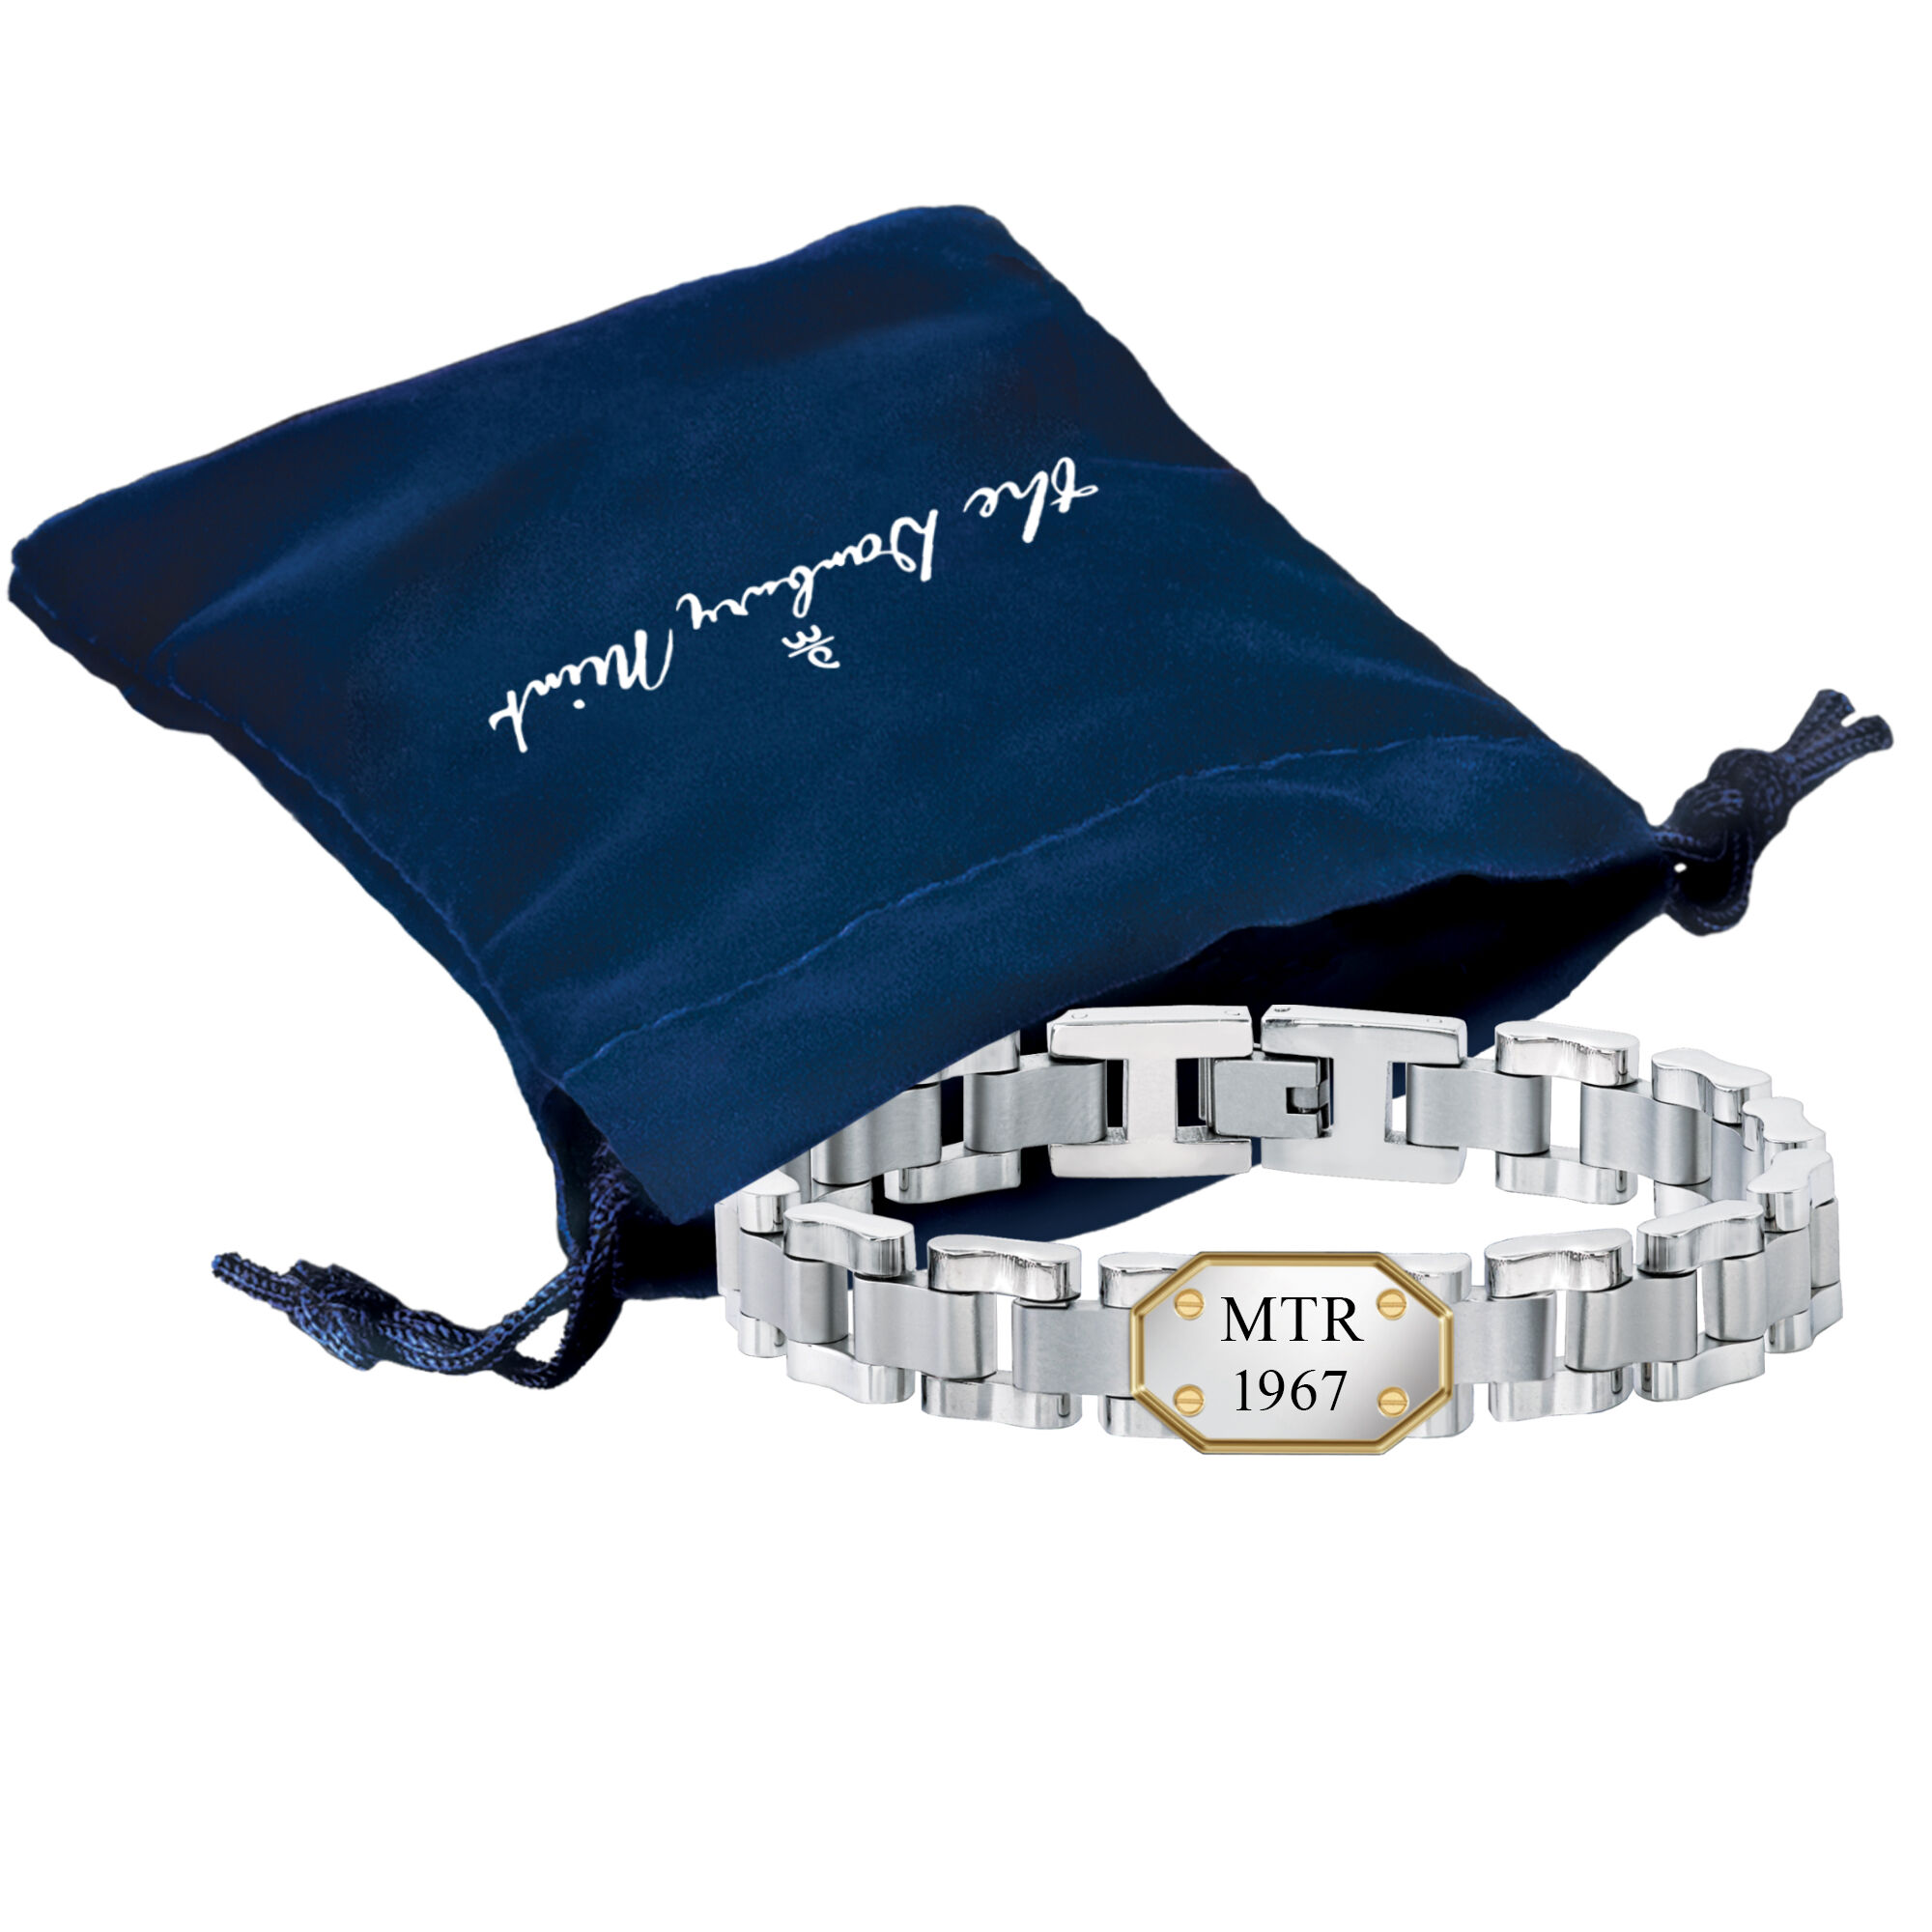 Personalized Birth Year Commemorative Bracelet 10104 0020 g gift pouch